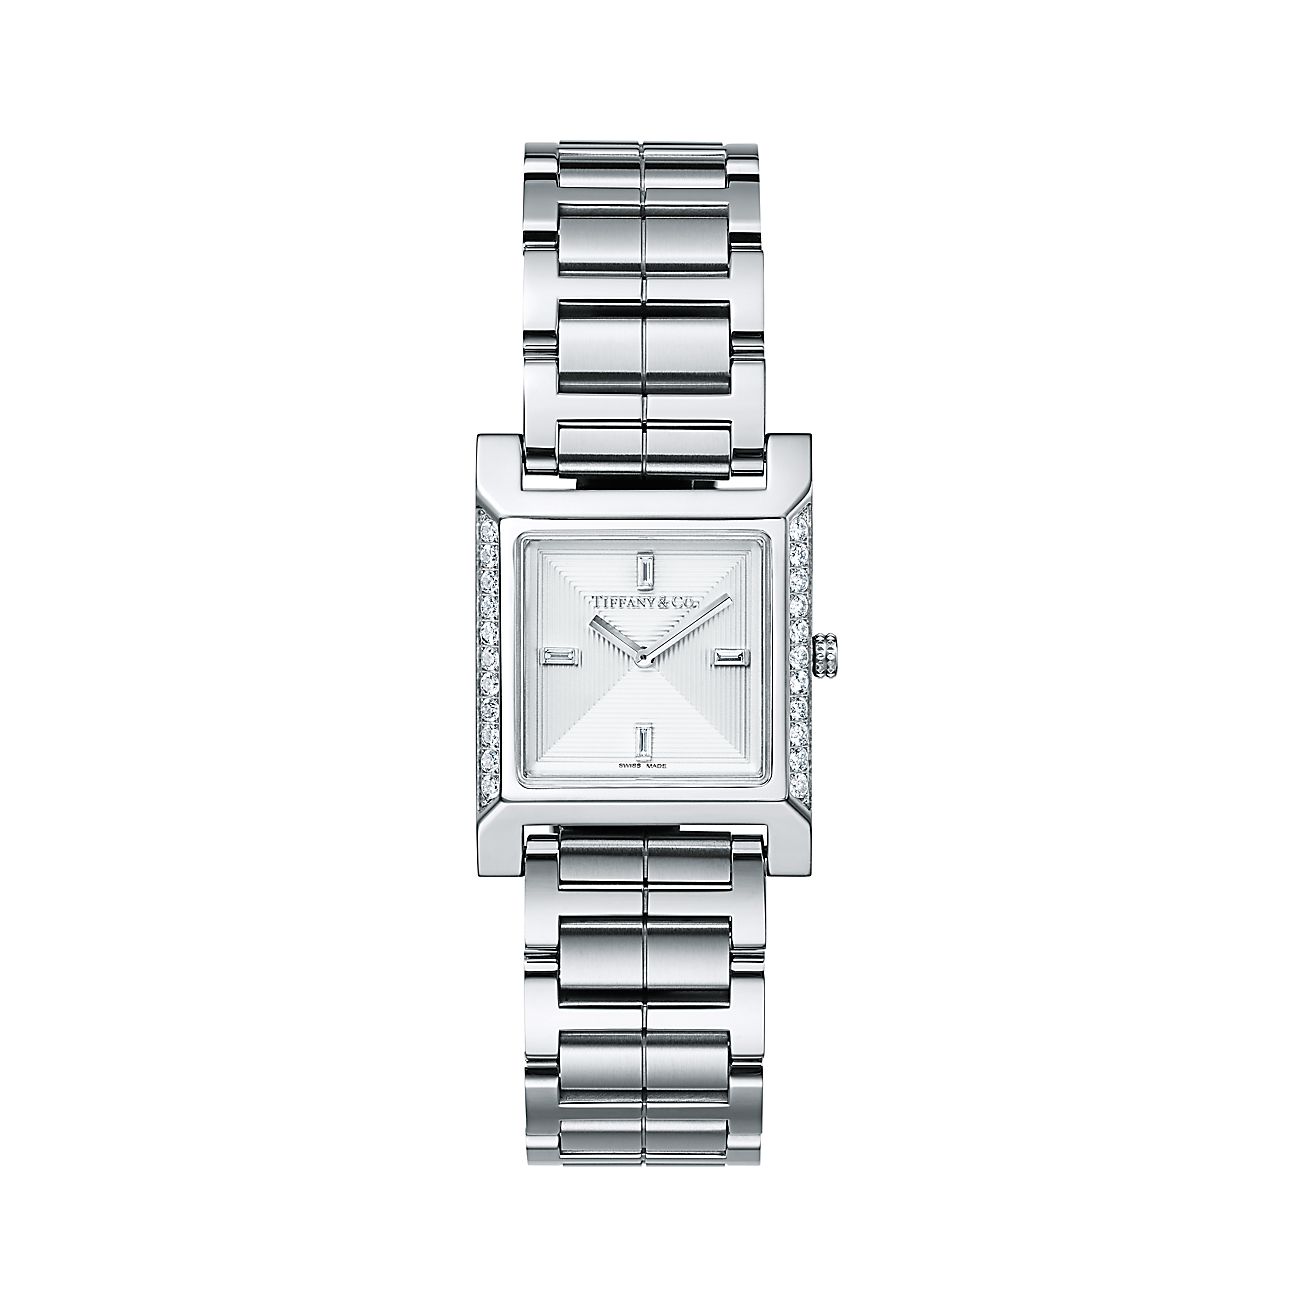 Tiffany 1837 Makers 22 mm square watch in stainless steel with